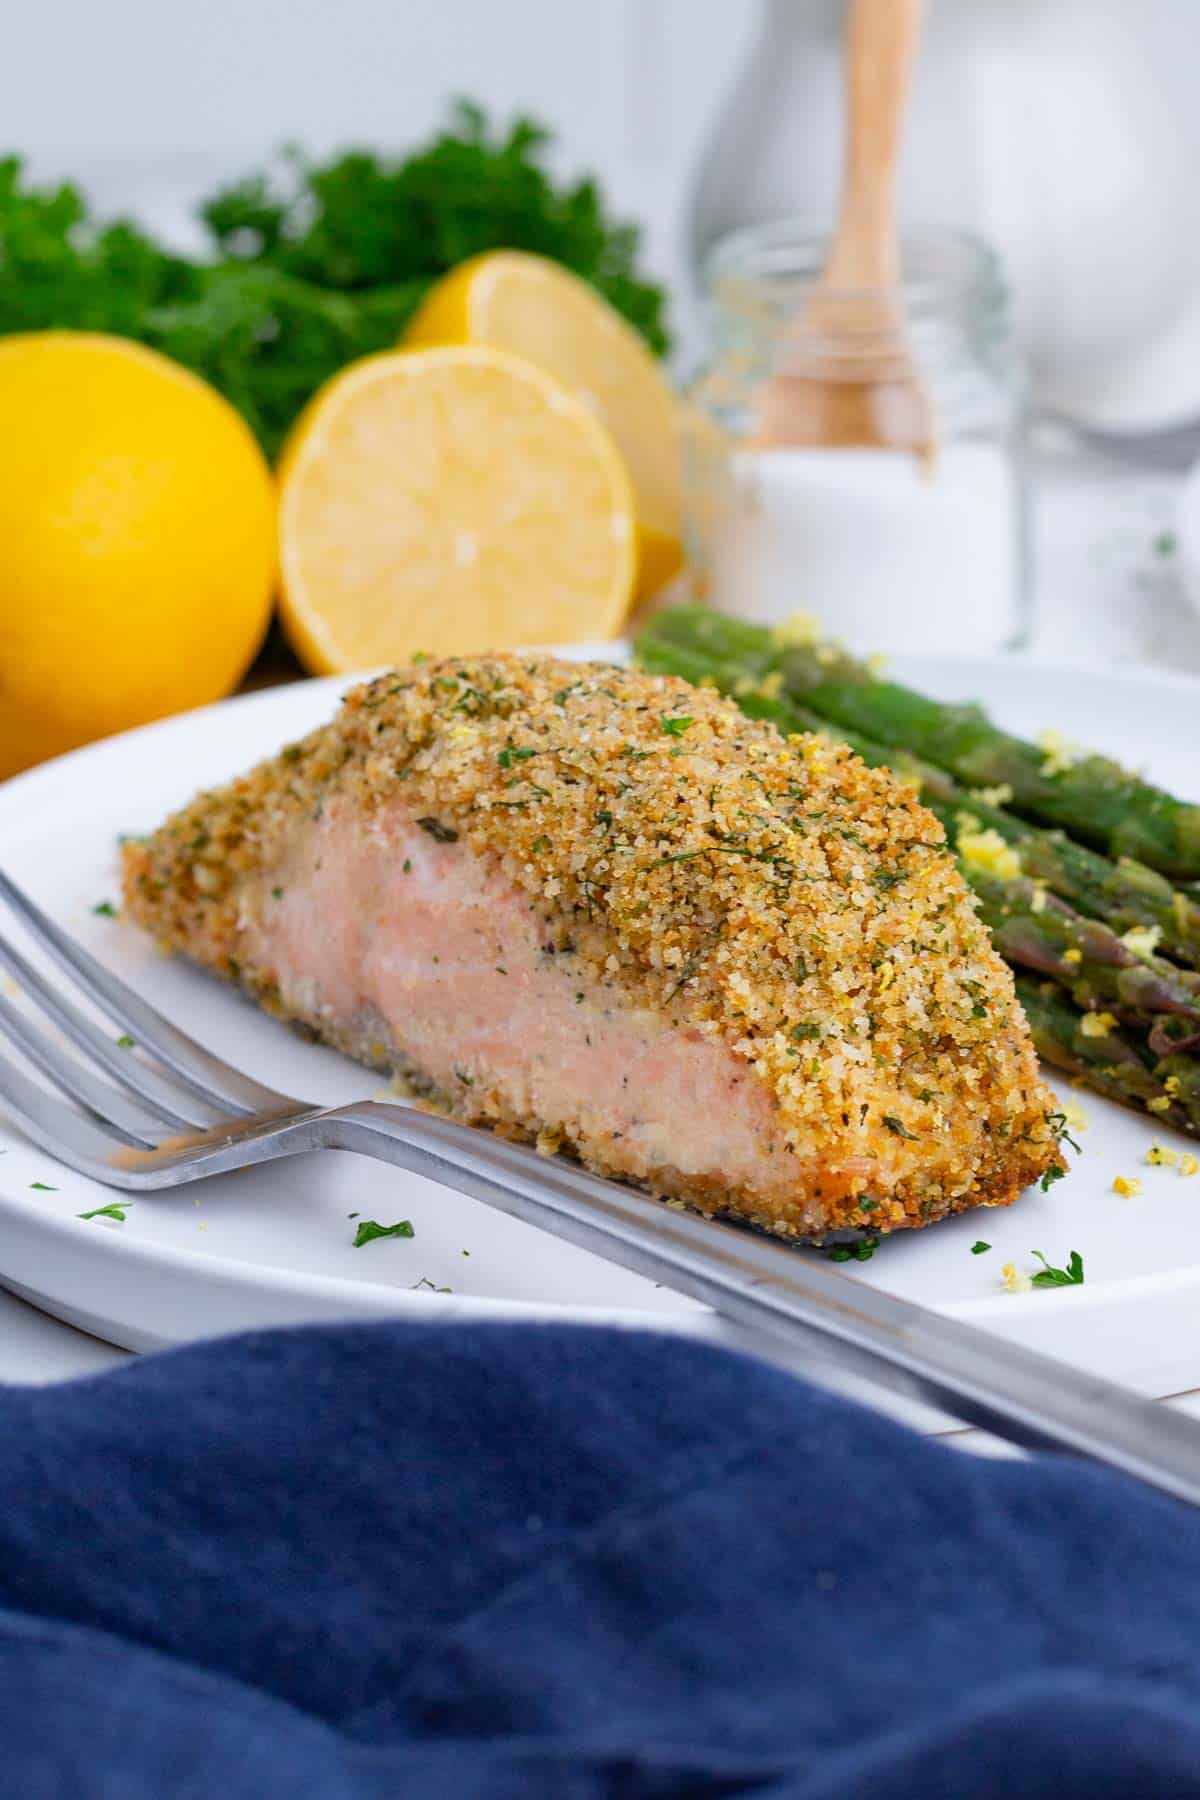 A filet of salmon and asparagus are served with a fork.